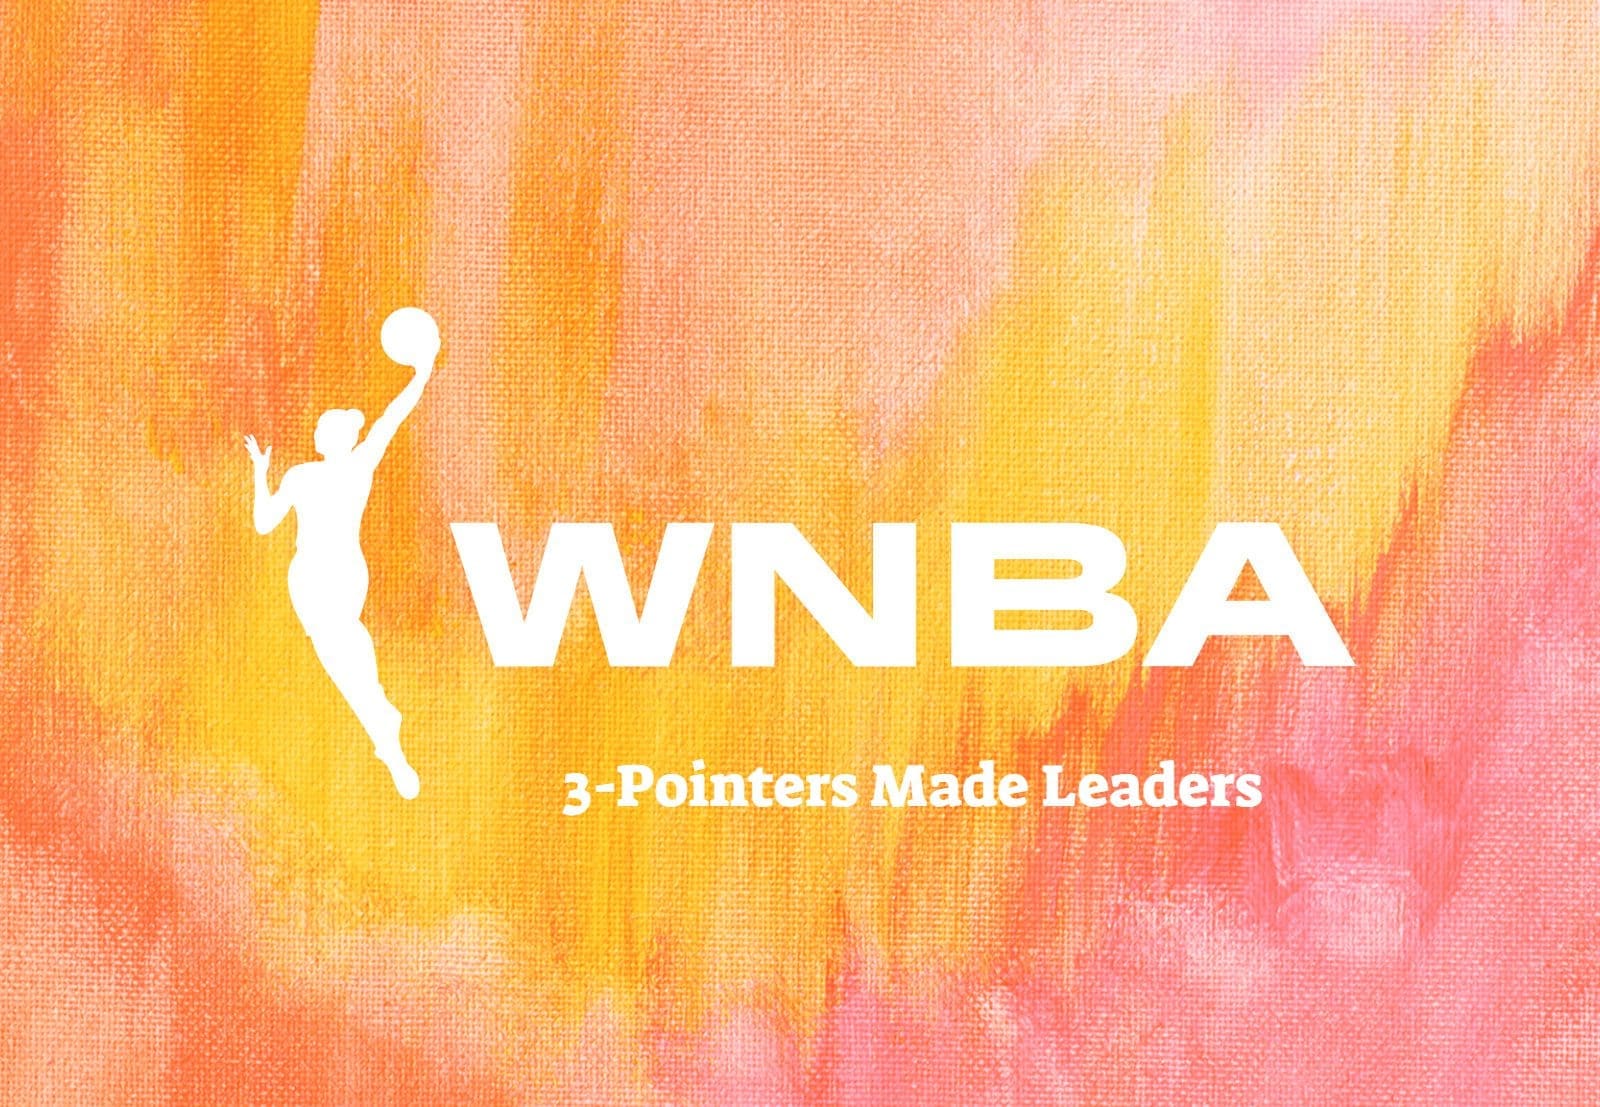 WNBA 3-Pointers Made Leaders